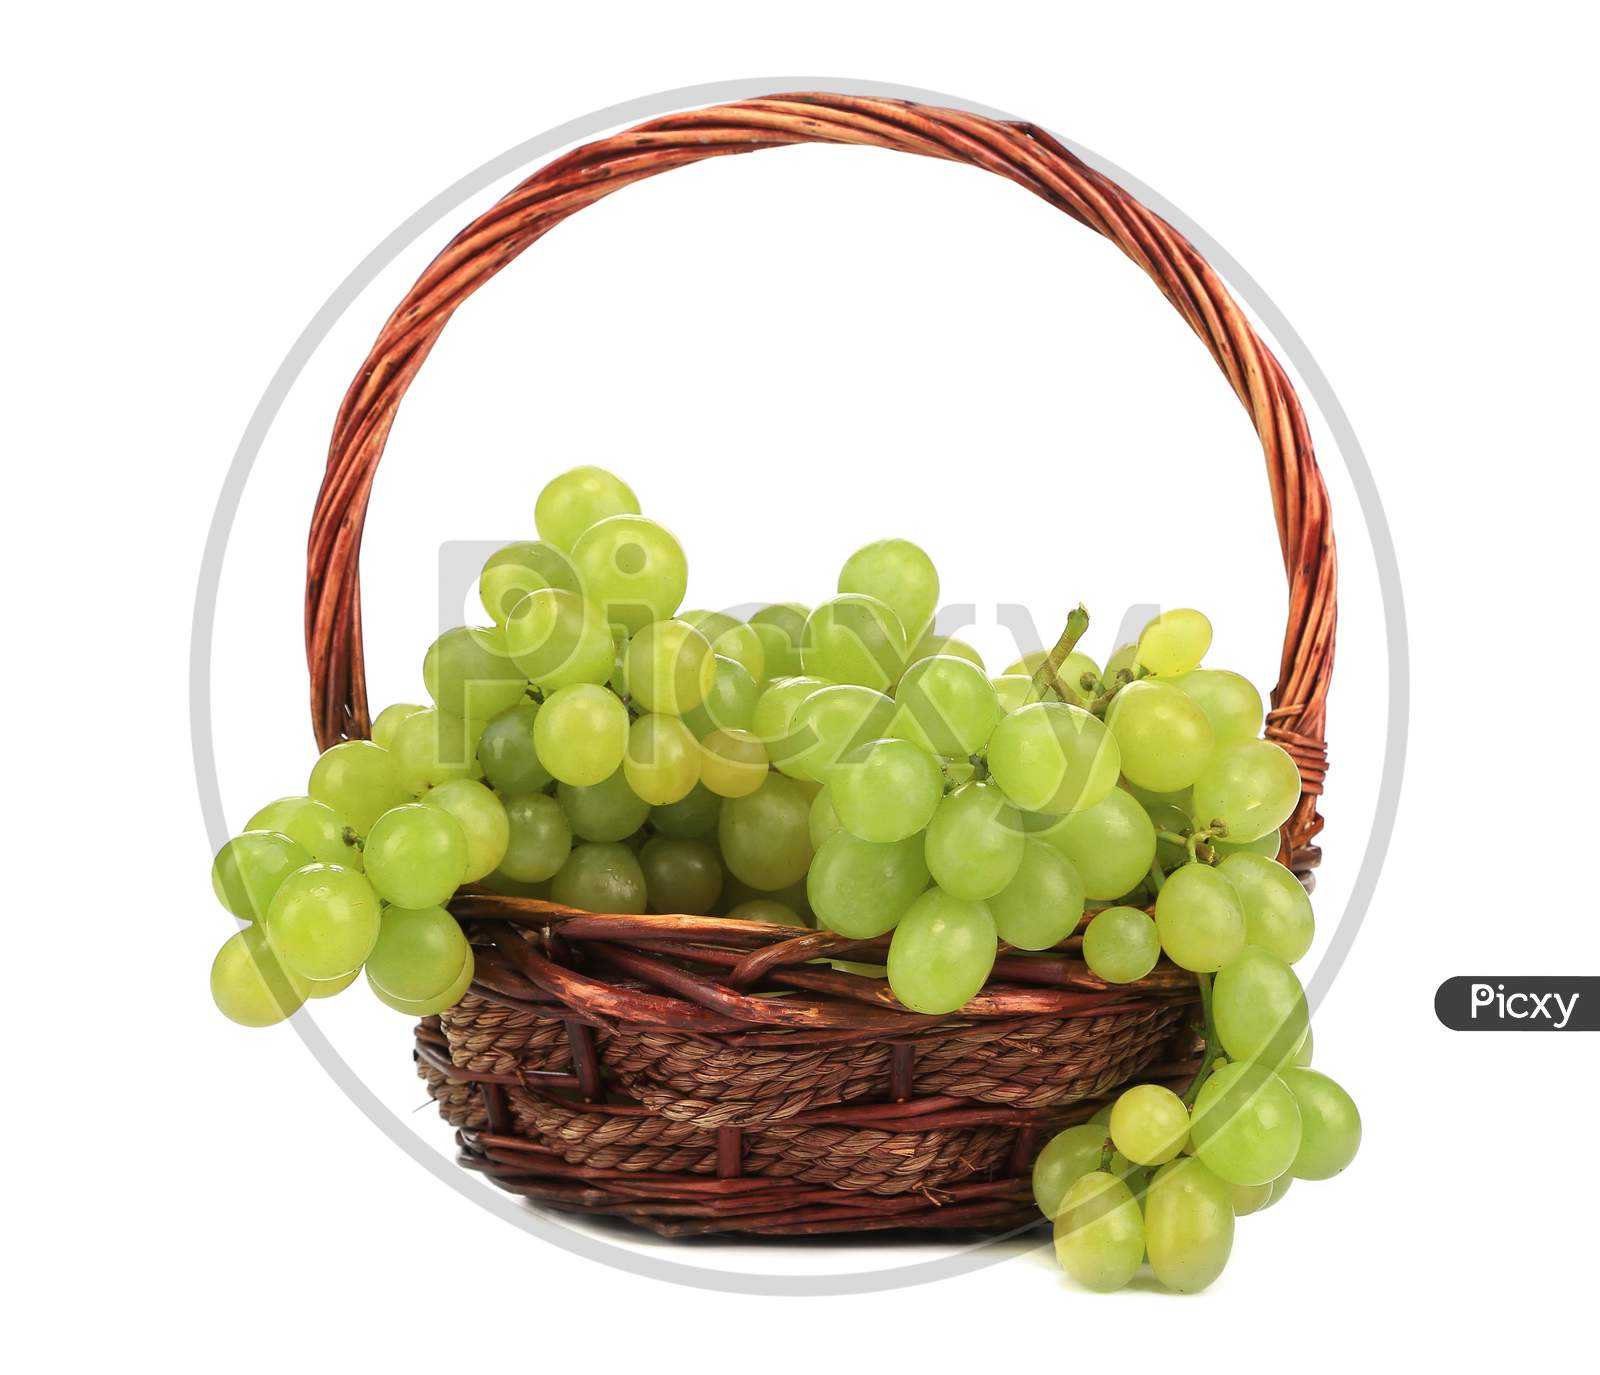 Green Ripe Grapes In Basket. Isolated On A White Backgropund.